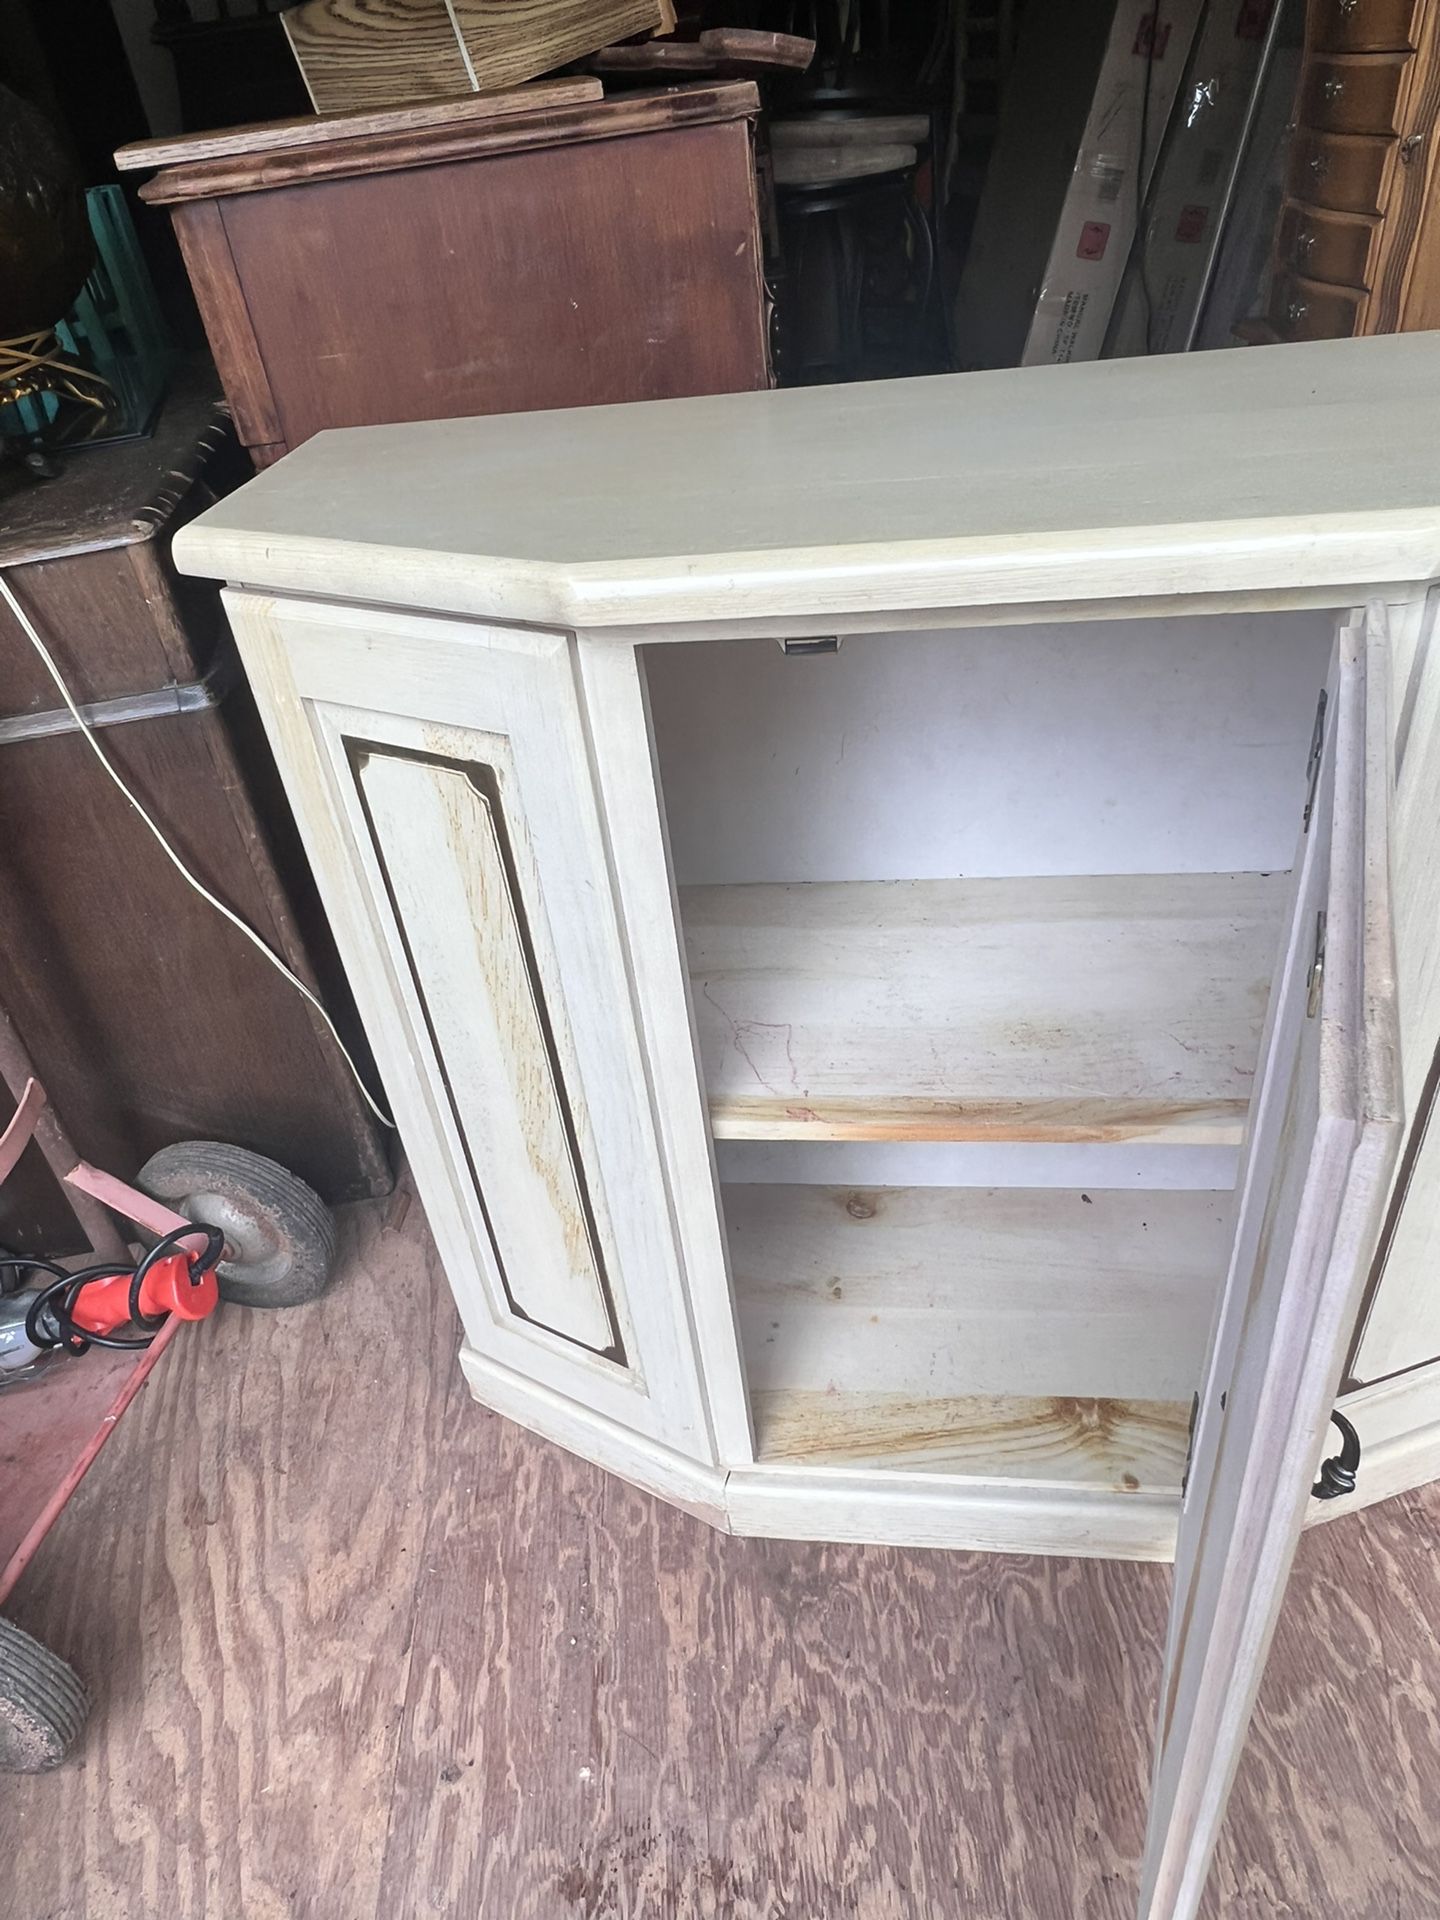 A Pretty Cabinet Its 30 inches  Tall 23 Inches Wide And 13 Inches Deep